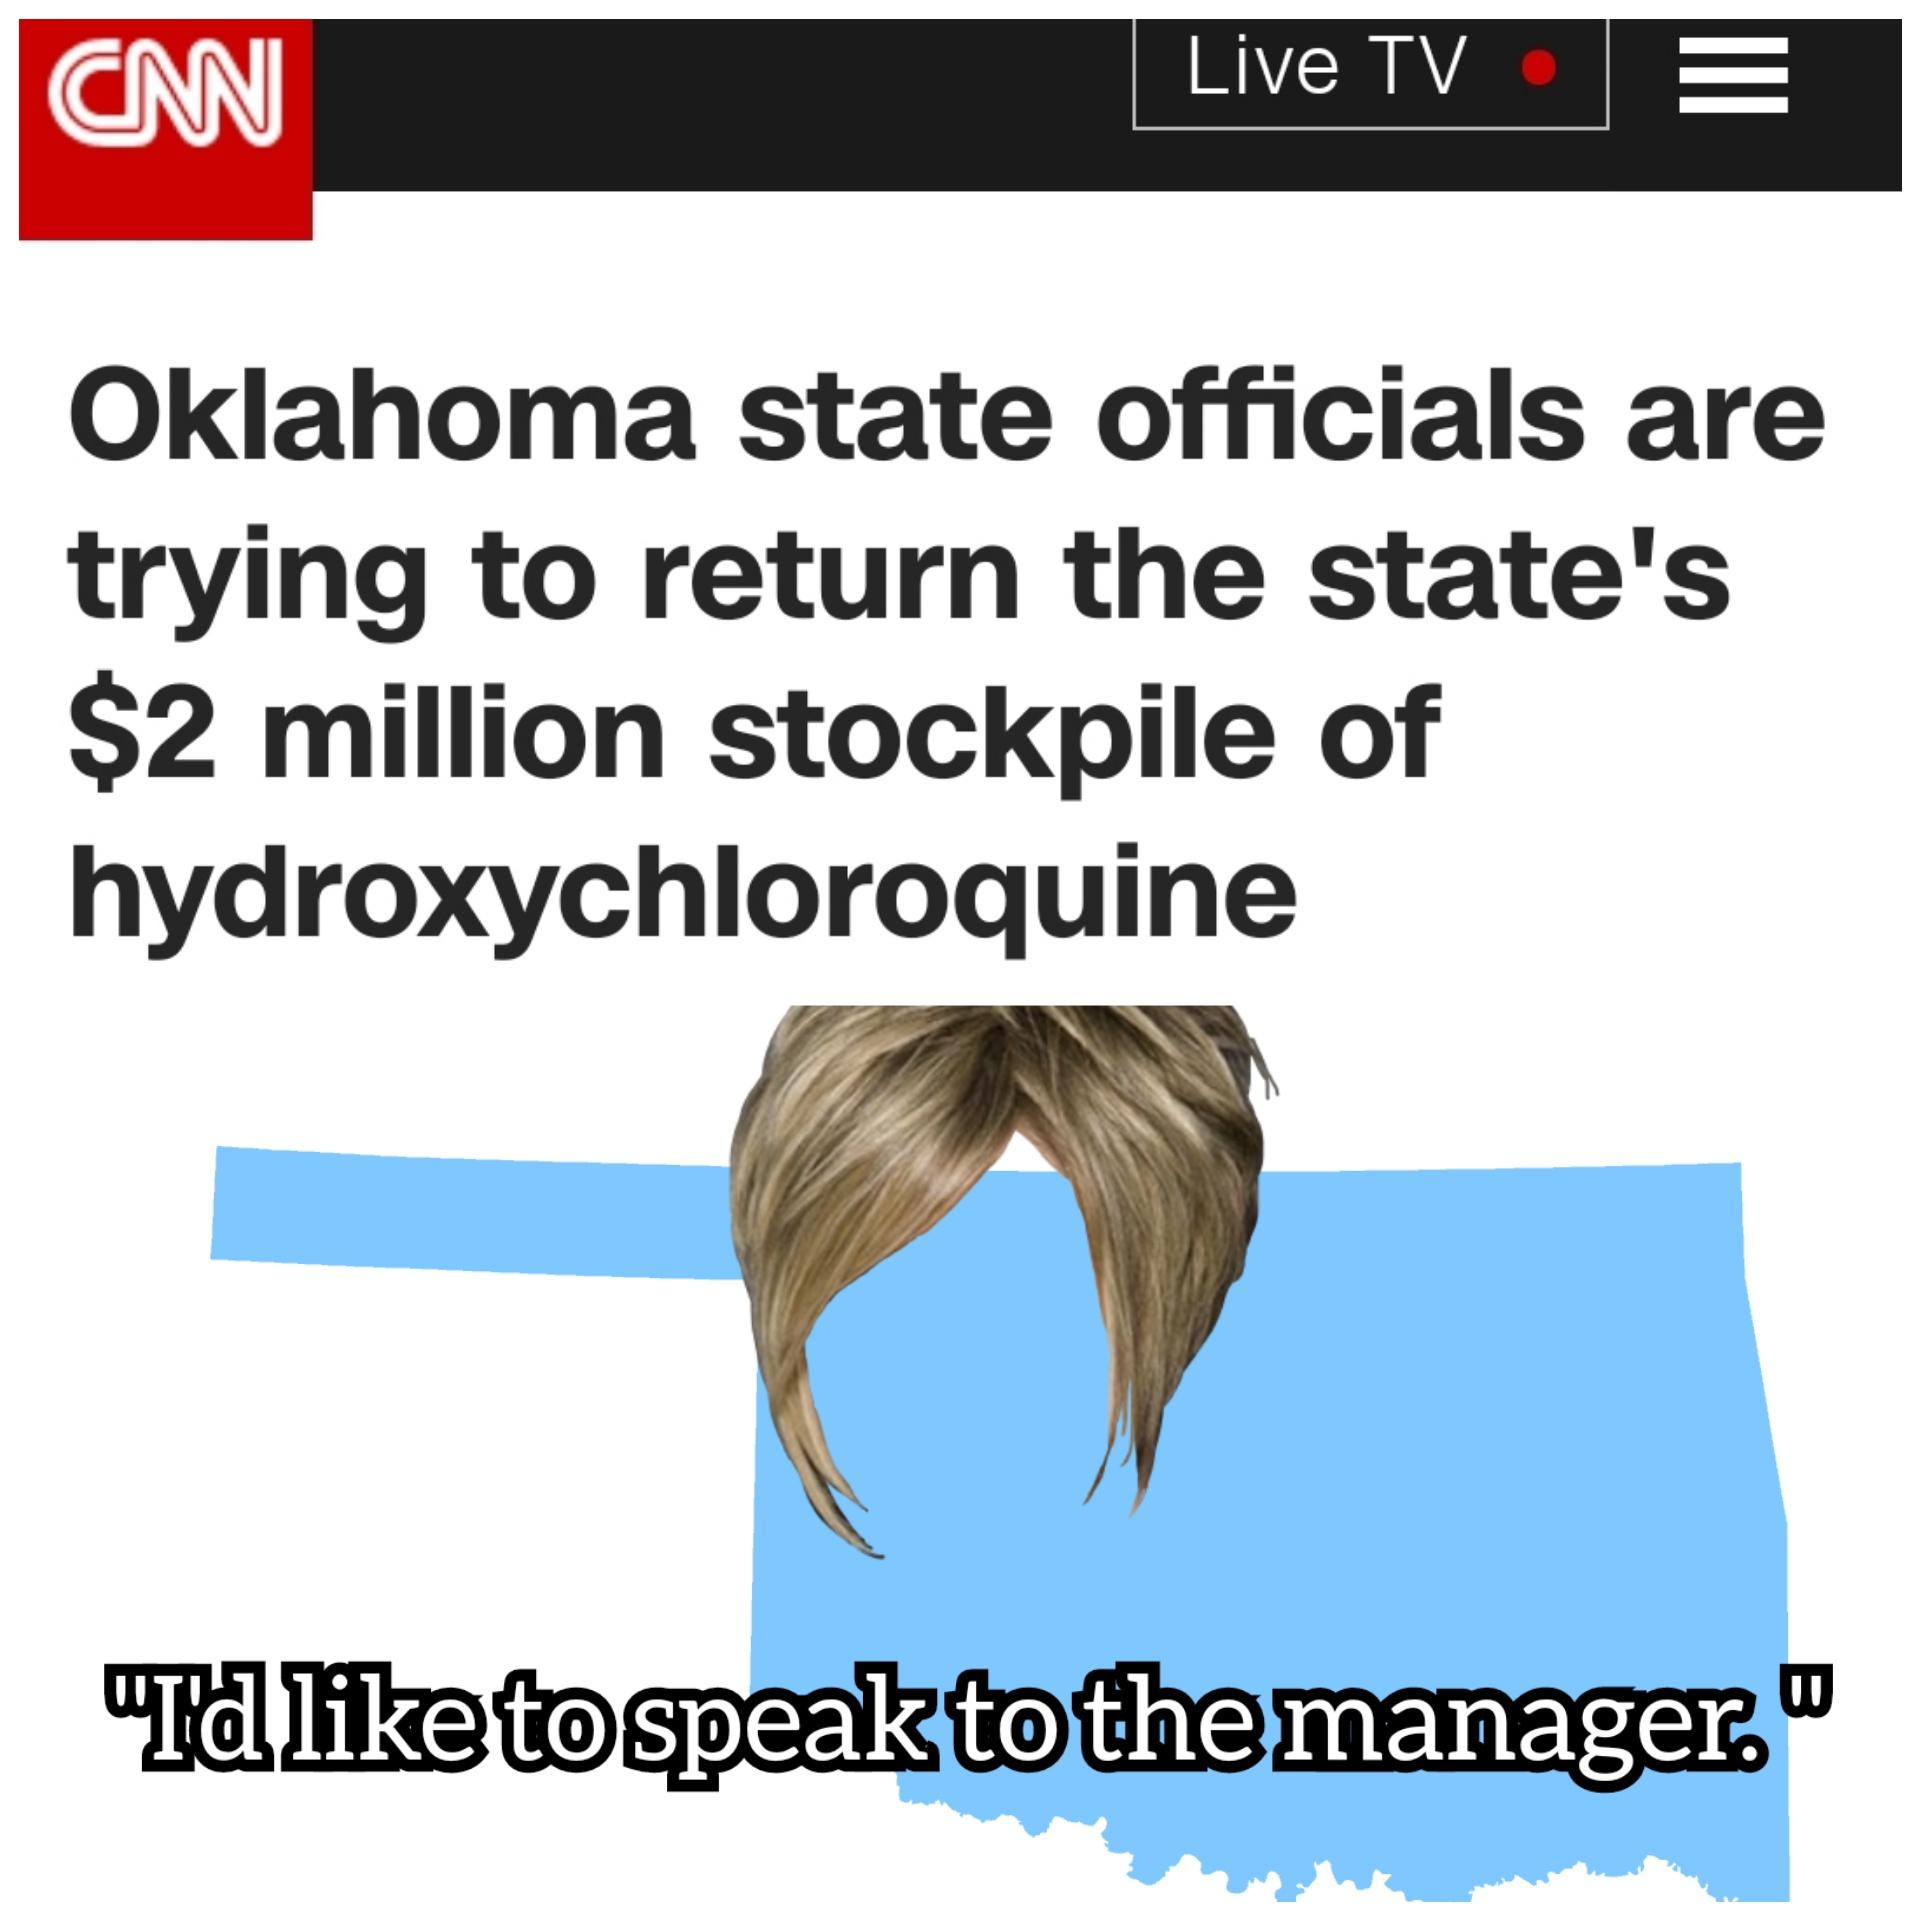 angle - Cm Live Tv Oklahoma state officials are trying to return the state's $2 million stockpile of hydroxychloroquine W "Td to speak to the manager.